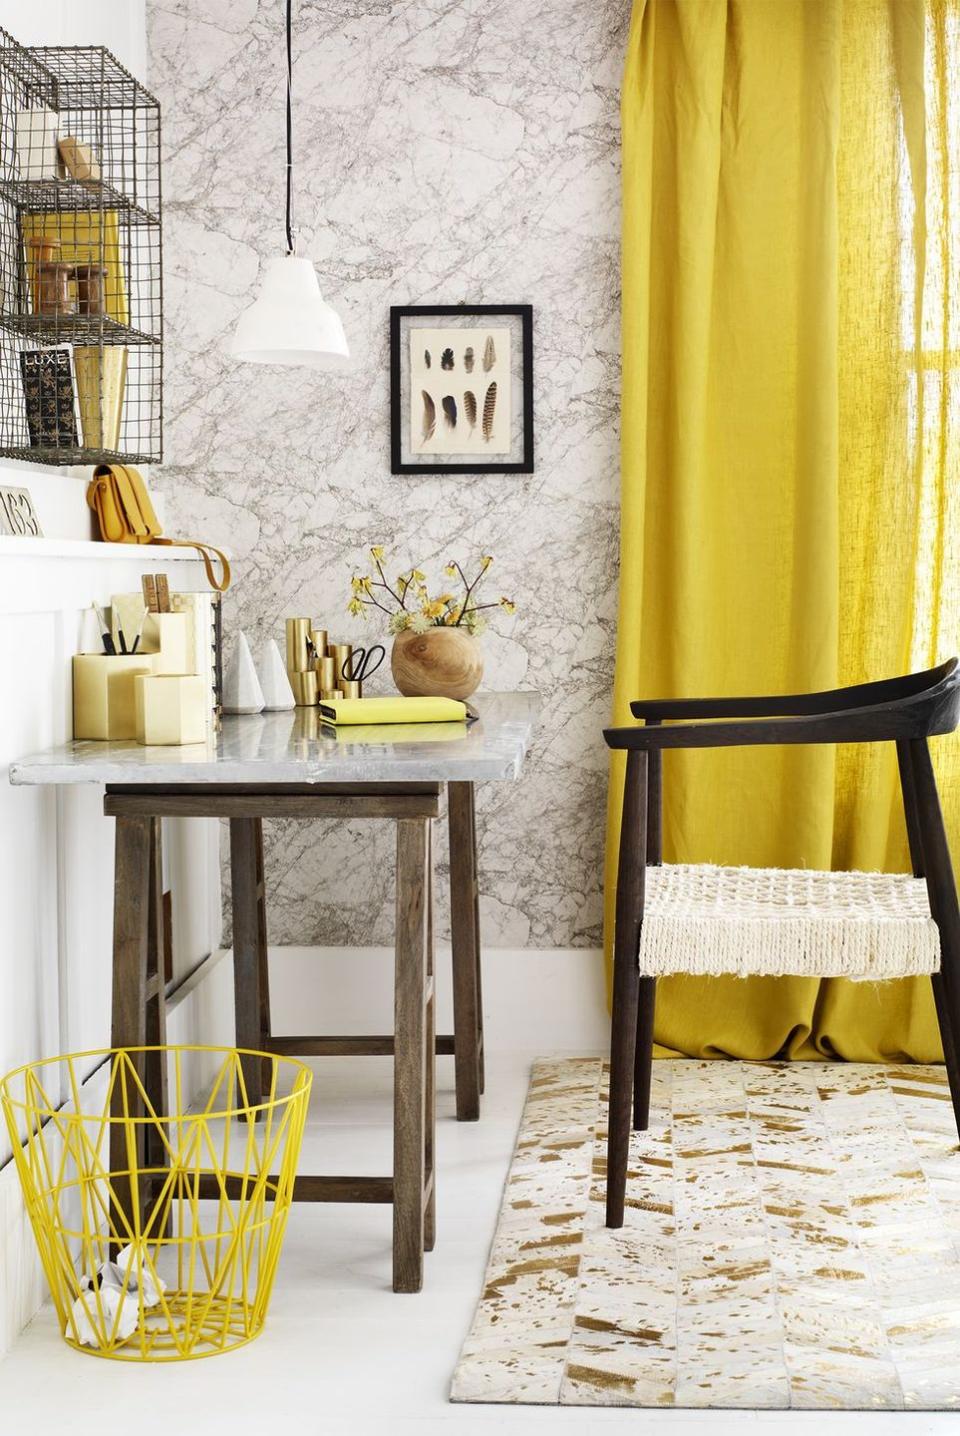 <p>Turn your bonus room into a dedicated workspace with a chic desk, colorful supplies, and just enough shelving for books and papers. </p>